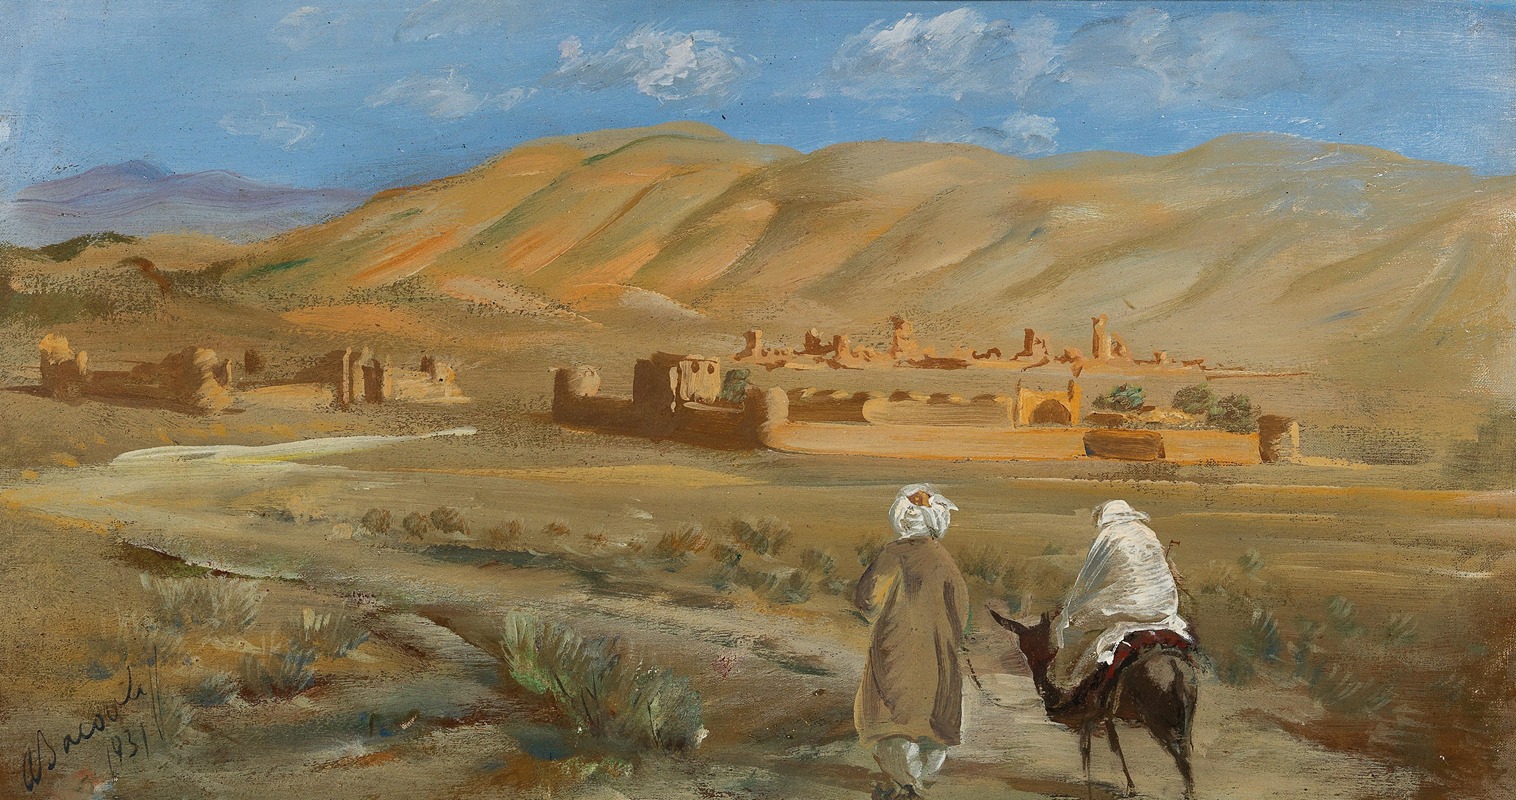 Alexandre Jacovleff - In the desert of Afghanistan